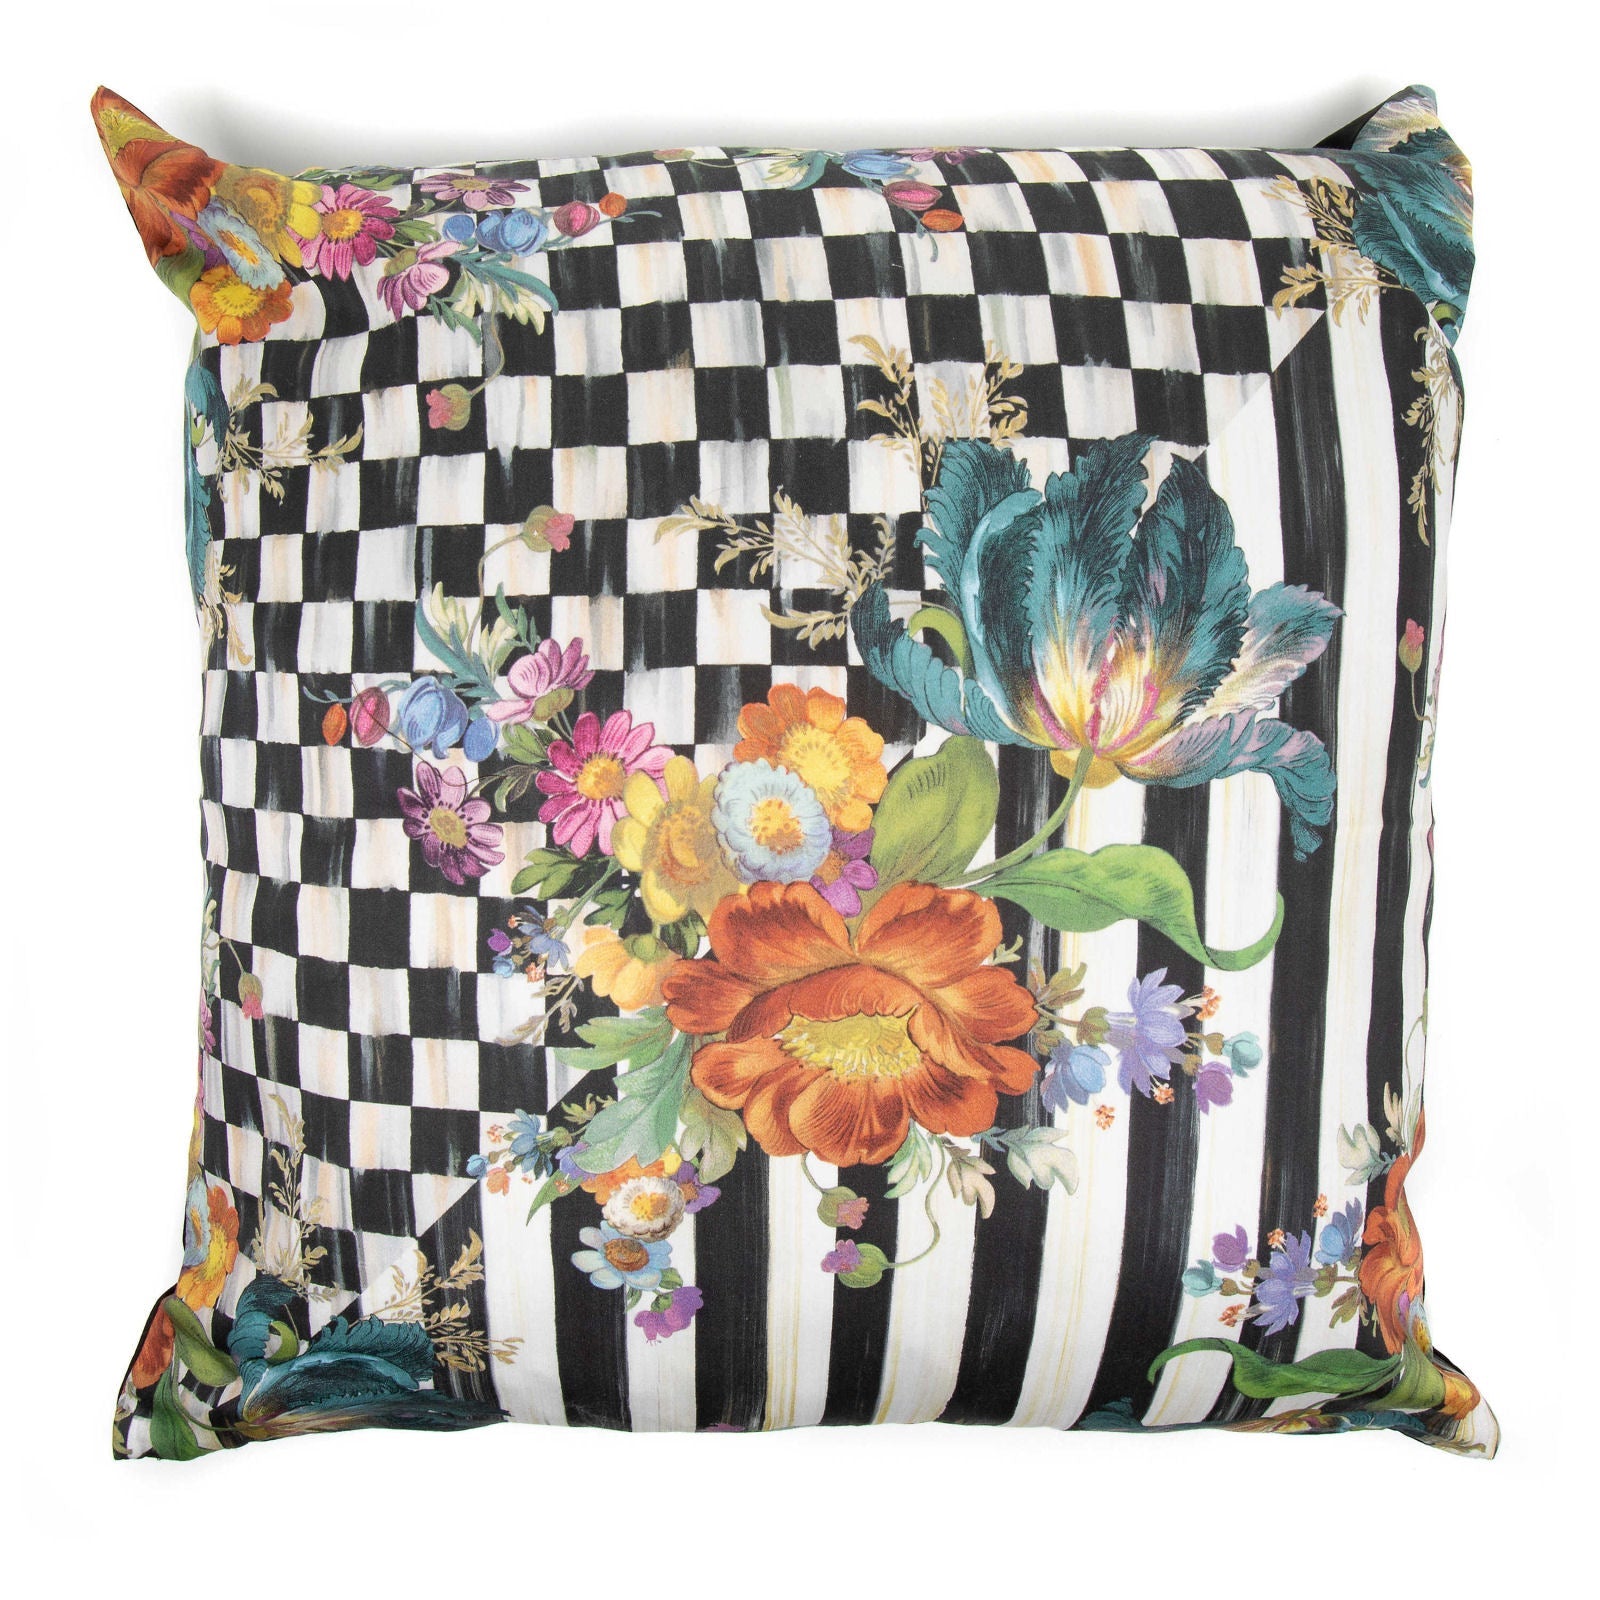 MacKenzie-Childs  Courtly Check Ruffled Square Throw Pillow